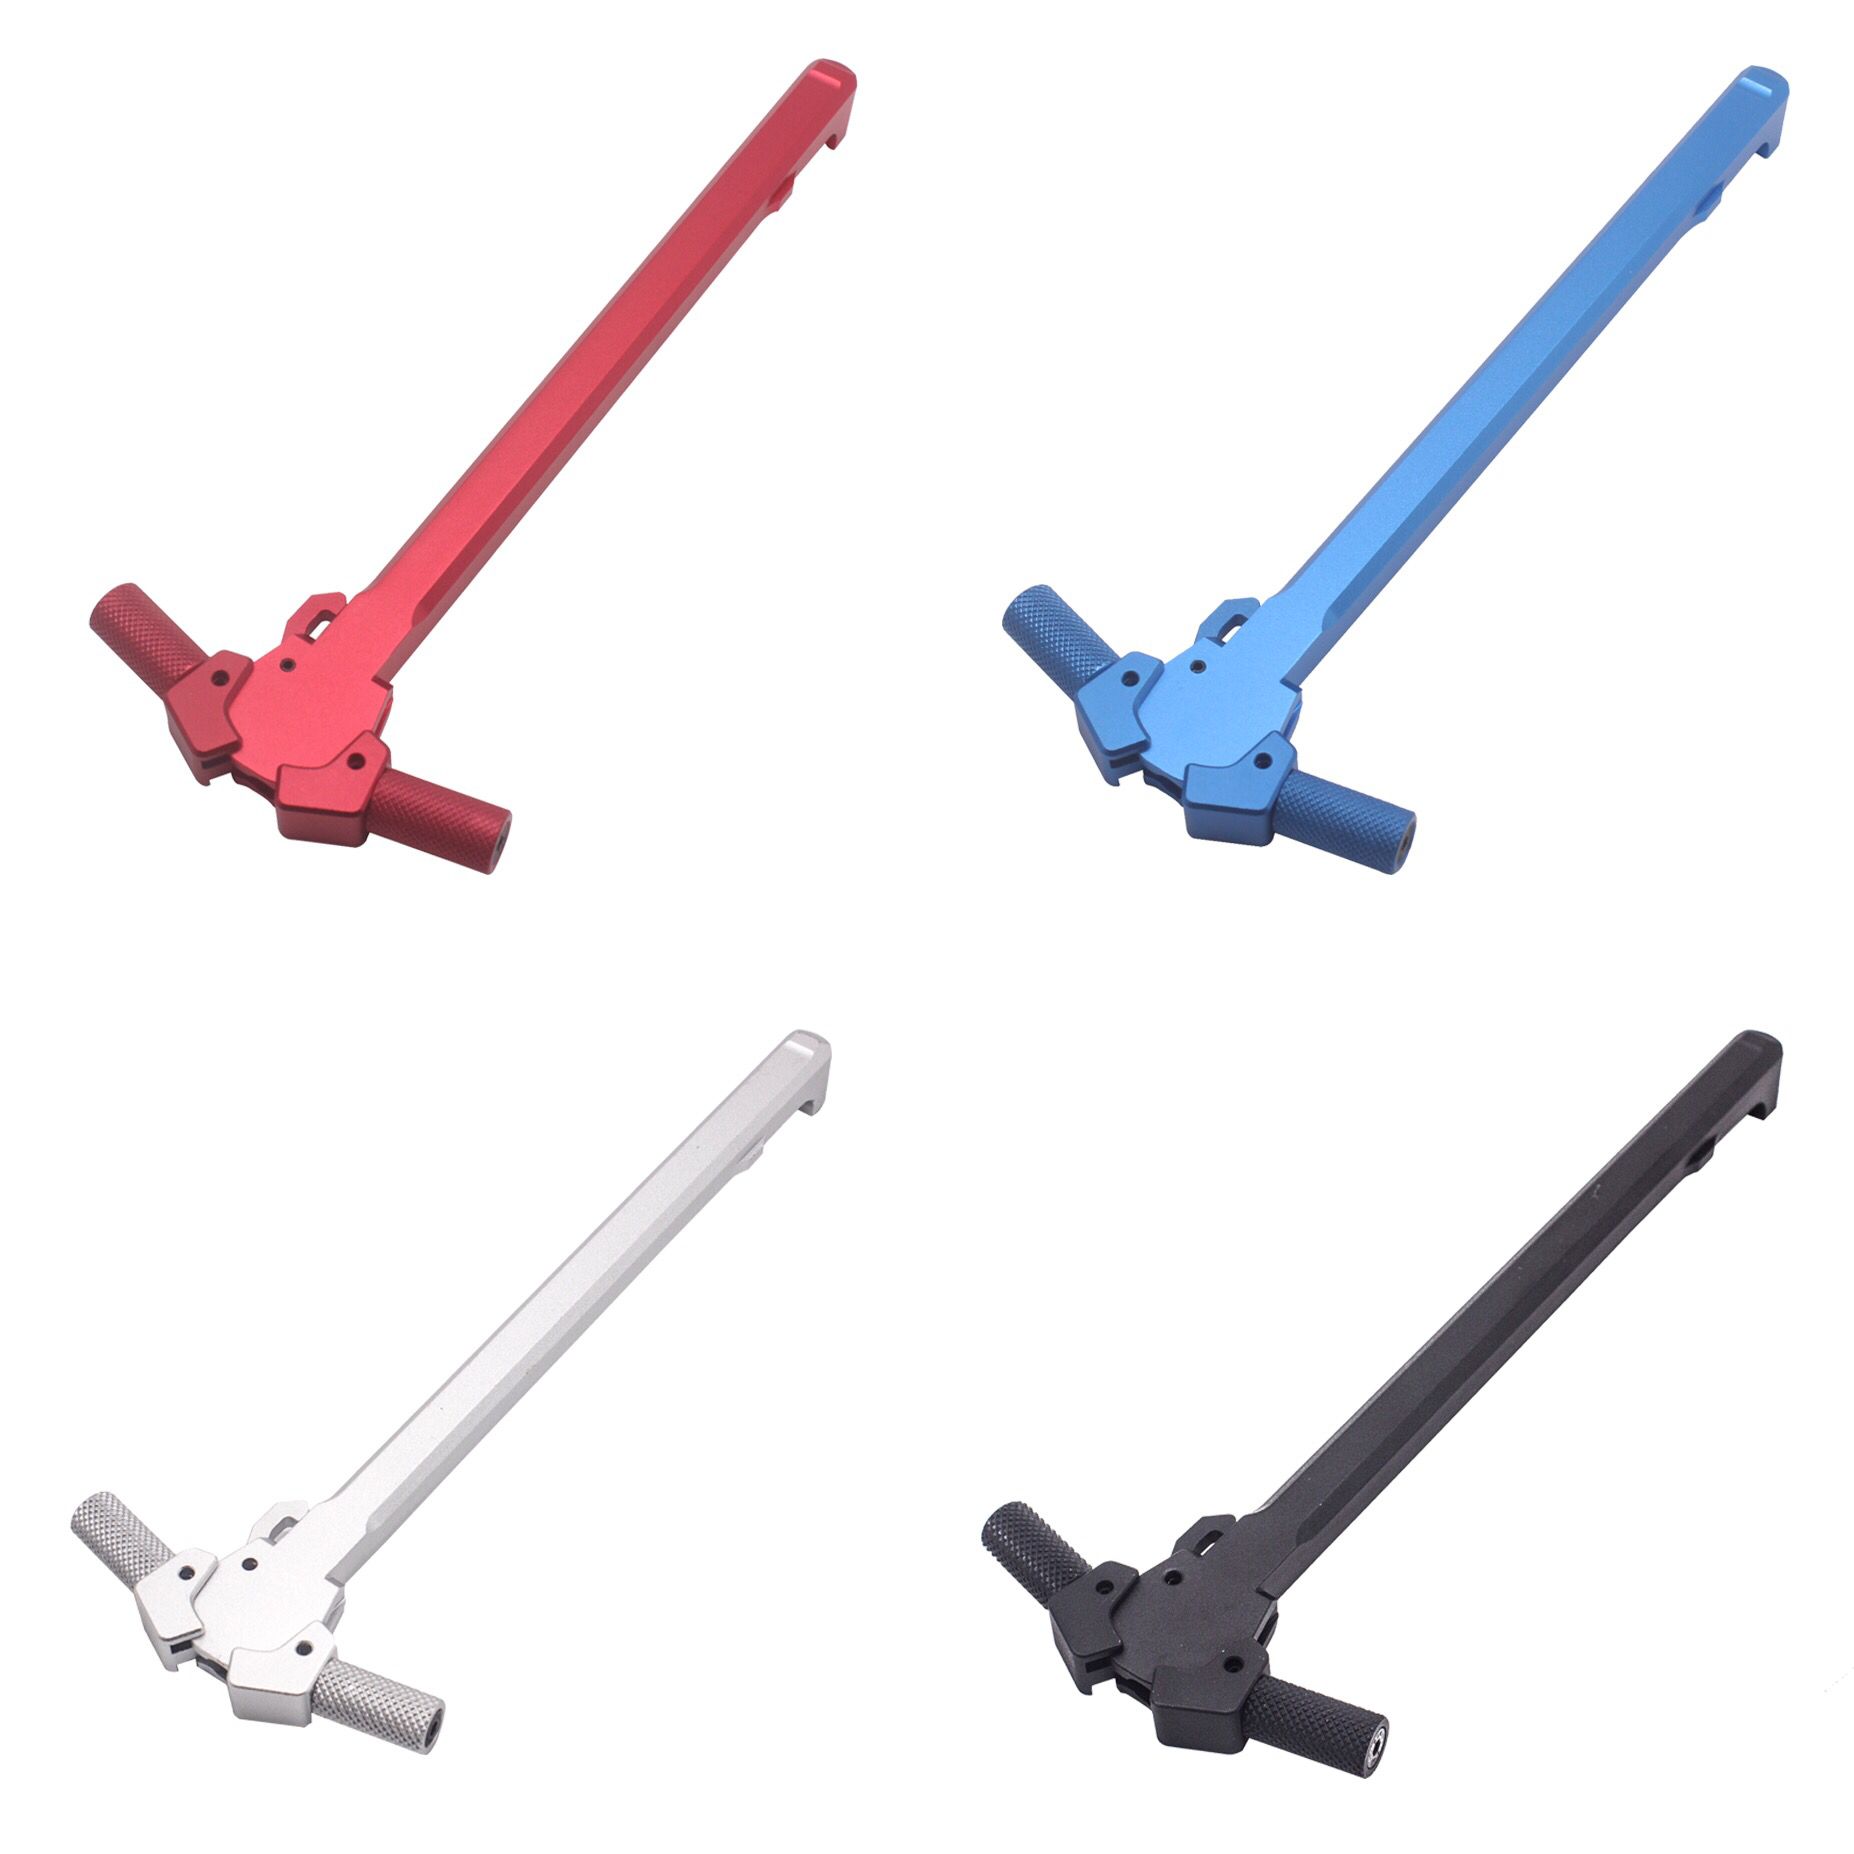 

New style CNC aluminum Cocking Charging Handle Extended Latch for 5.56 GBB M4/AR15 Series Airsoft